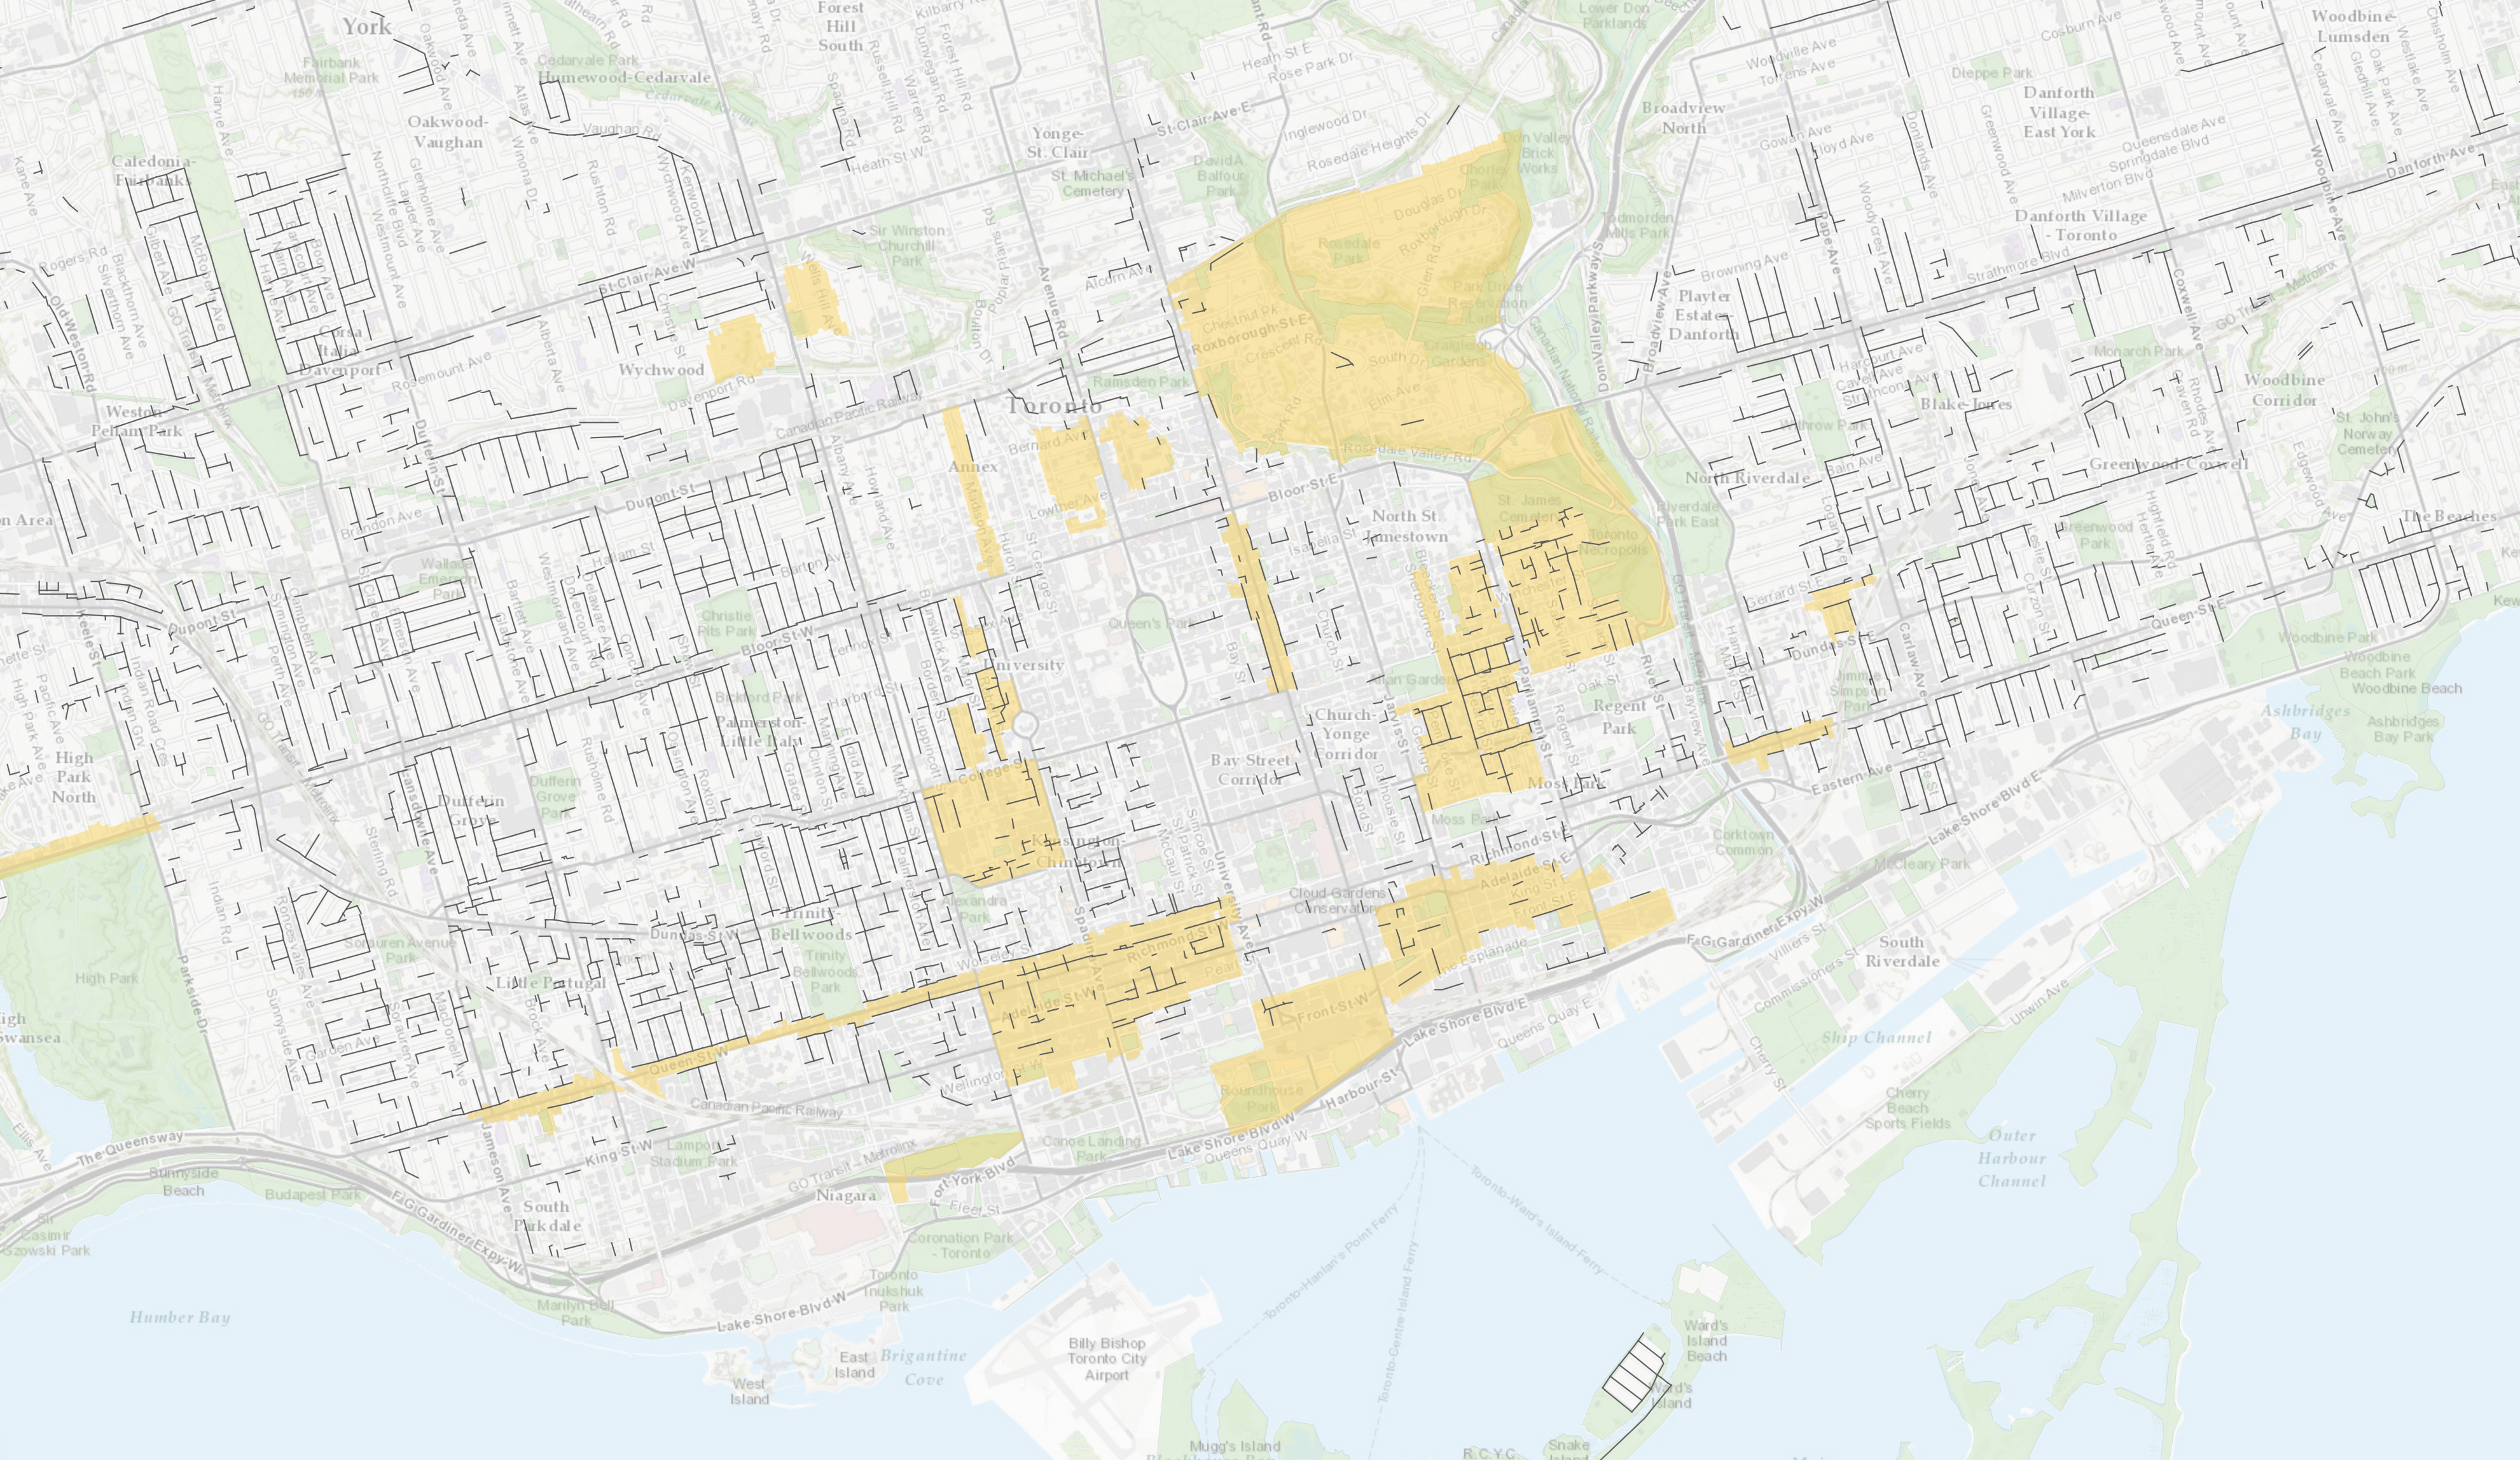 A map of Toronto's laneways overlapped by the Heritage Conservation Districts.